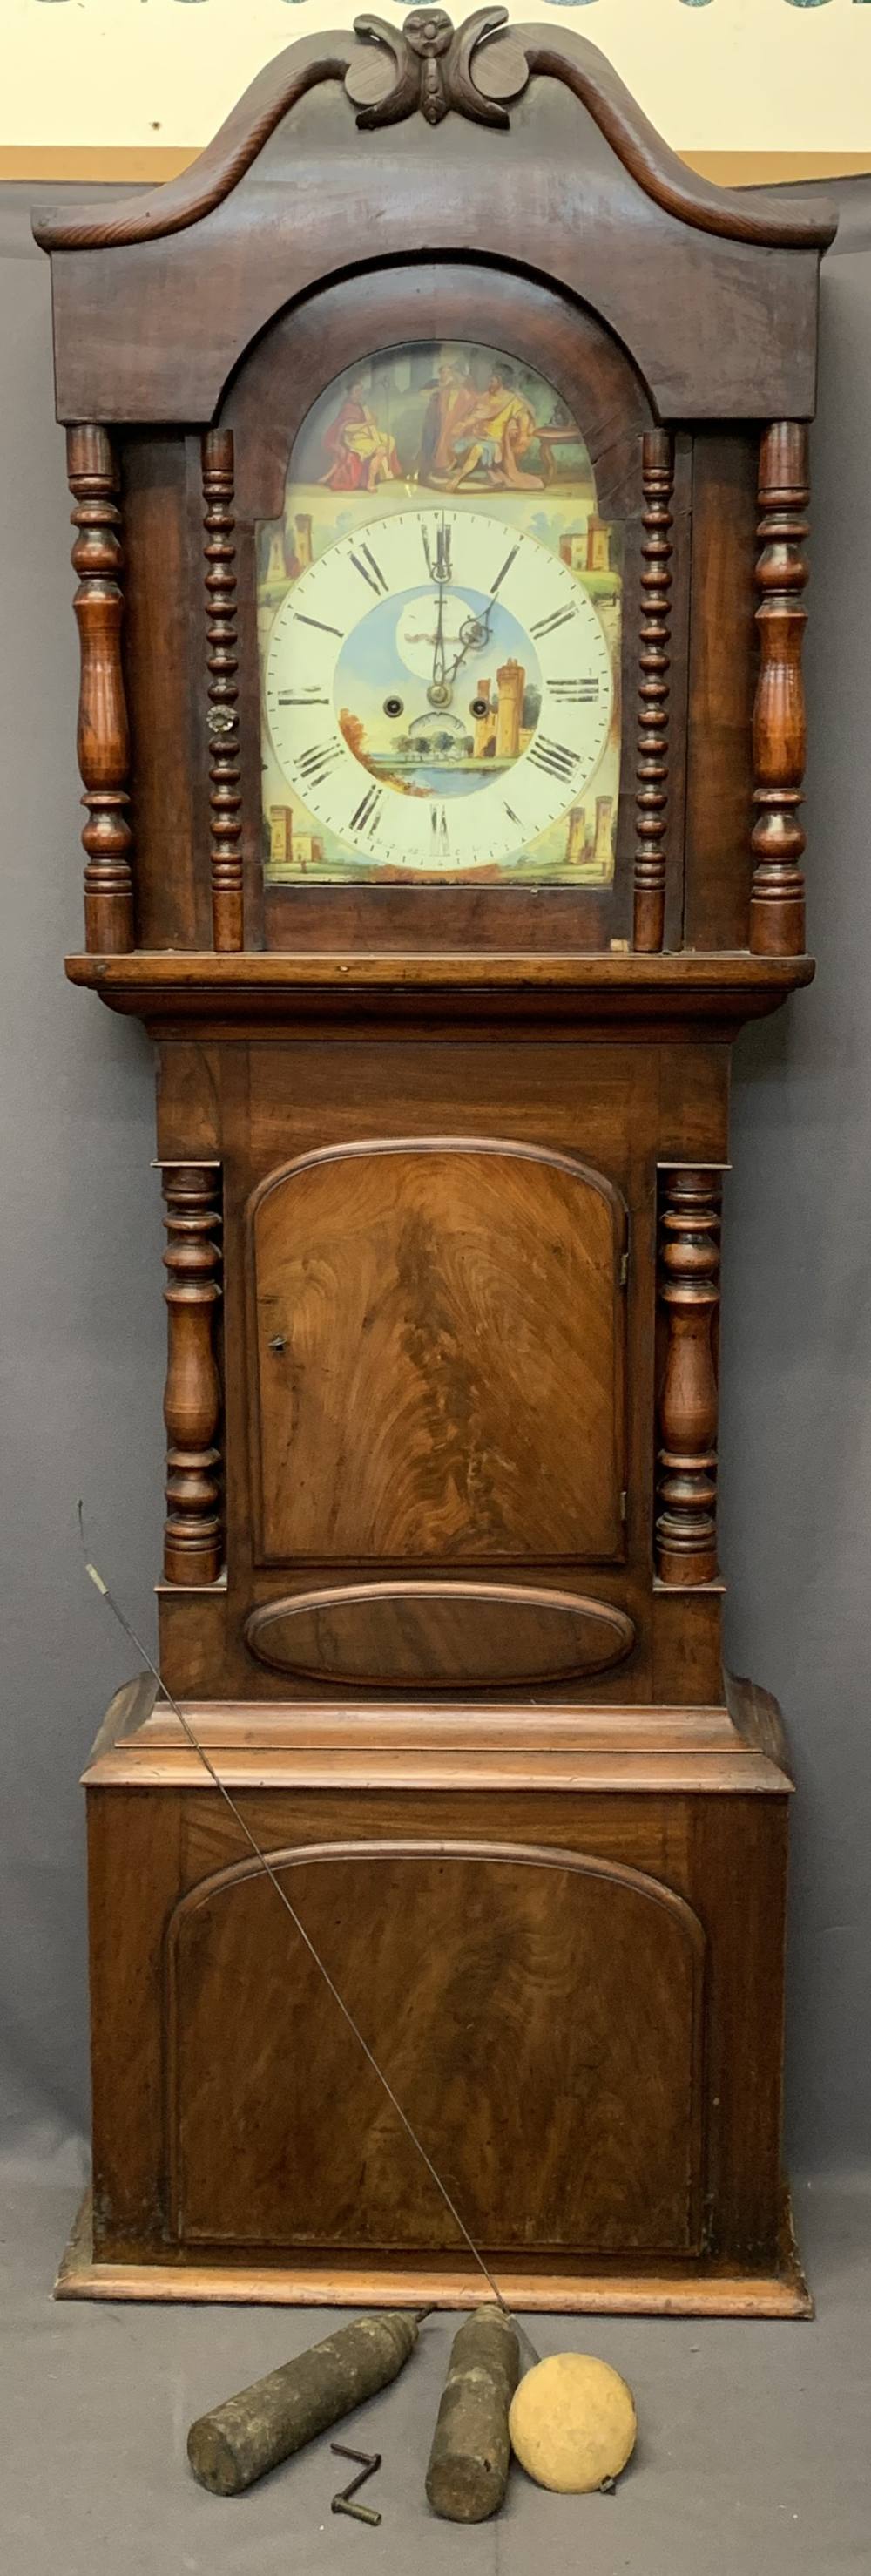 W EDWARDS, CAERNARFON EIGHT DAY LONGCASE CLOCK, mahogany with arched painted dial - Image 2 of 14